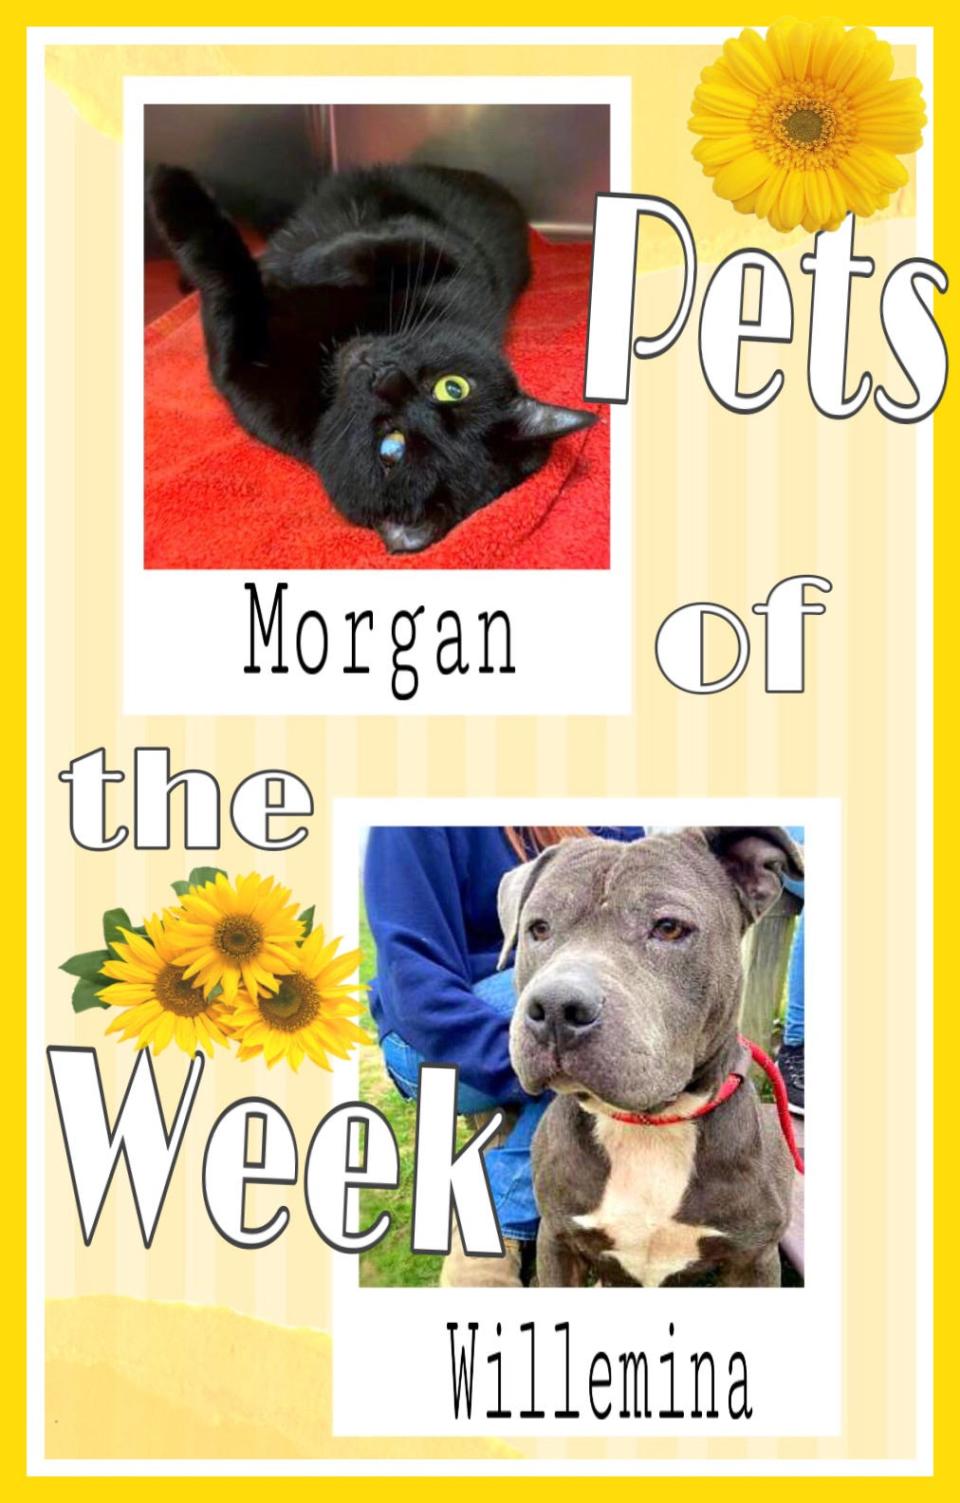 Pets of the Week: Morgan and Willemina
https://www.burlingtoncountytimes.com/story/lifestyle/2022/05/20/burlington-nj-adopt-pets-of-the-week-morgan-cat-willemina-dog-are-ready-for-prom/9831656002/